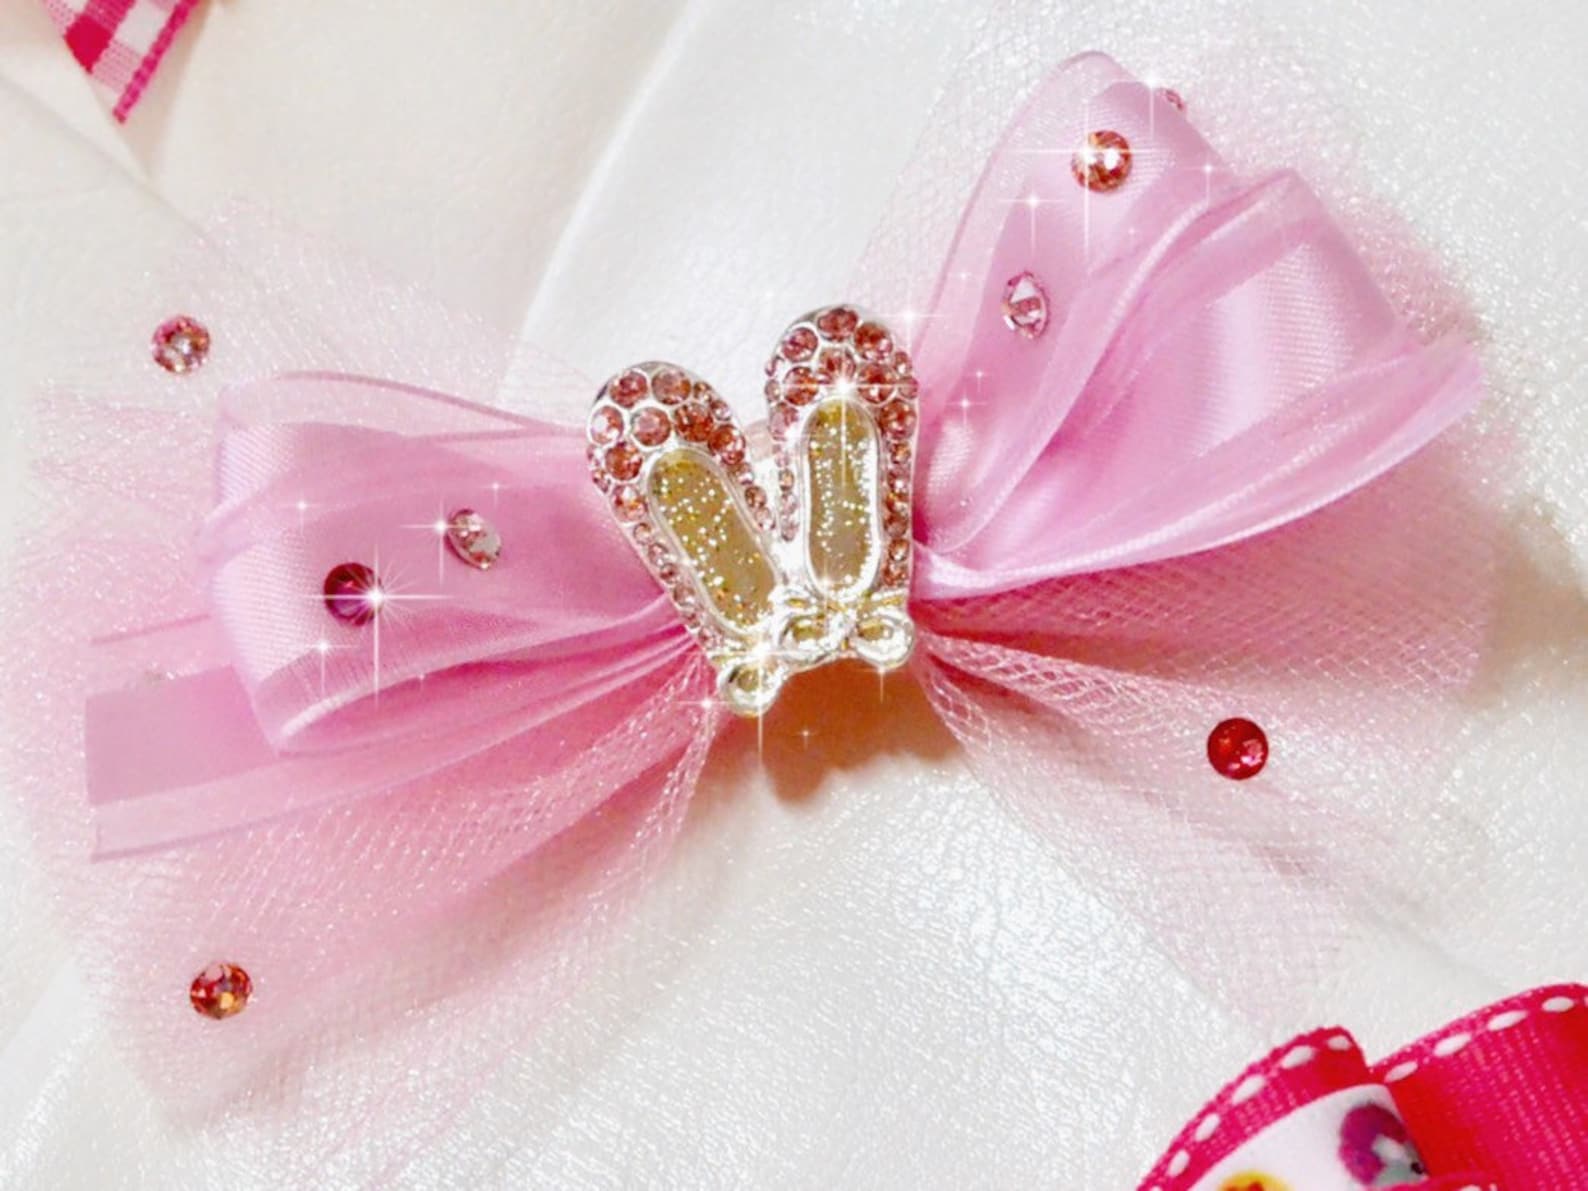 ballet shoes with authentic swarovski top knot dog bow